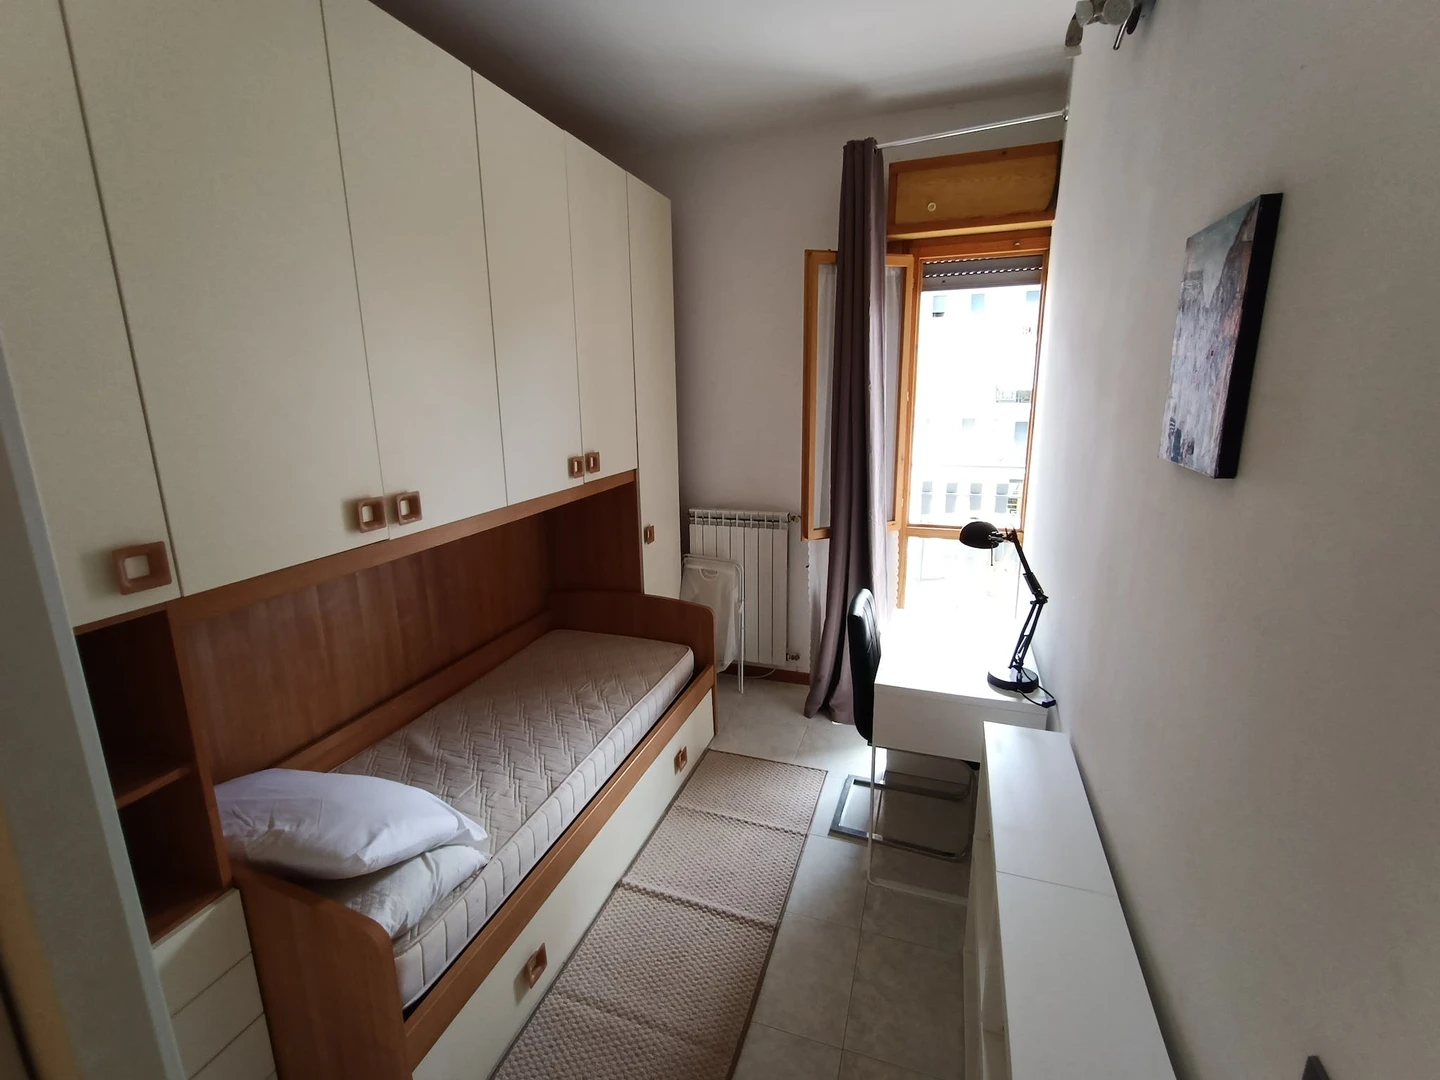 Renting rooms by the month in Viterbo